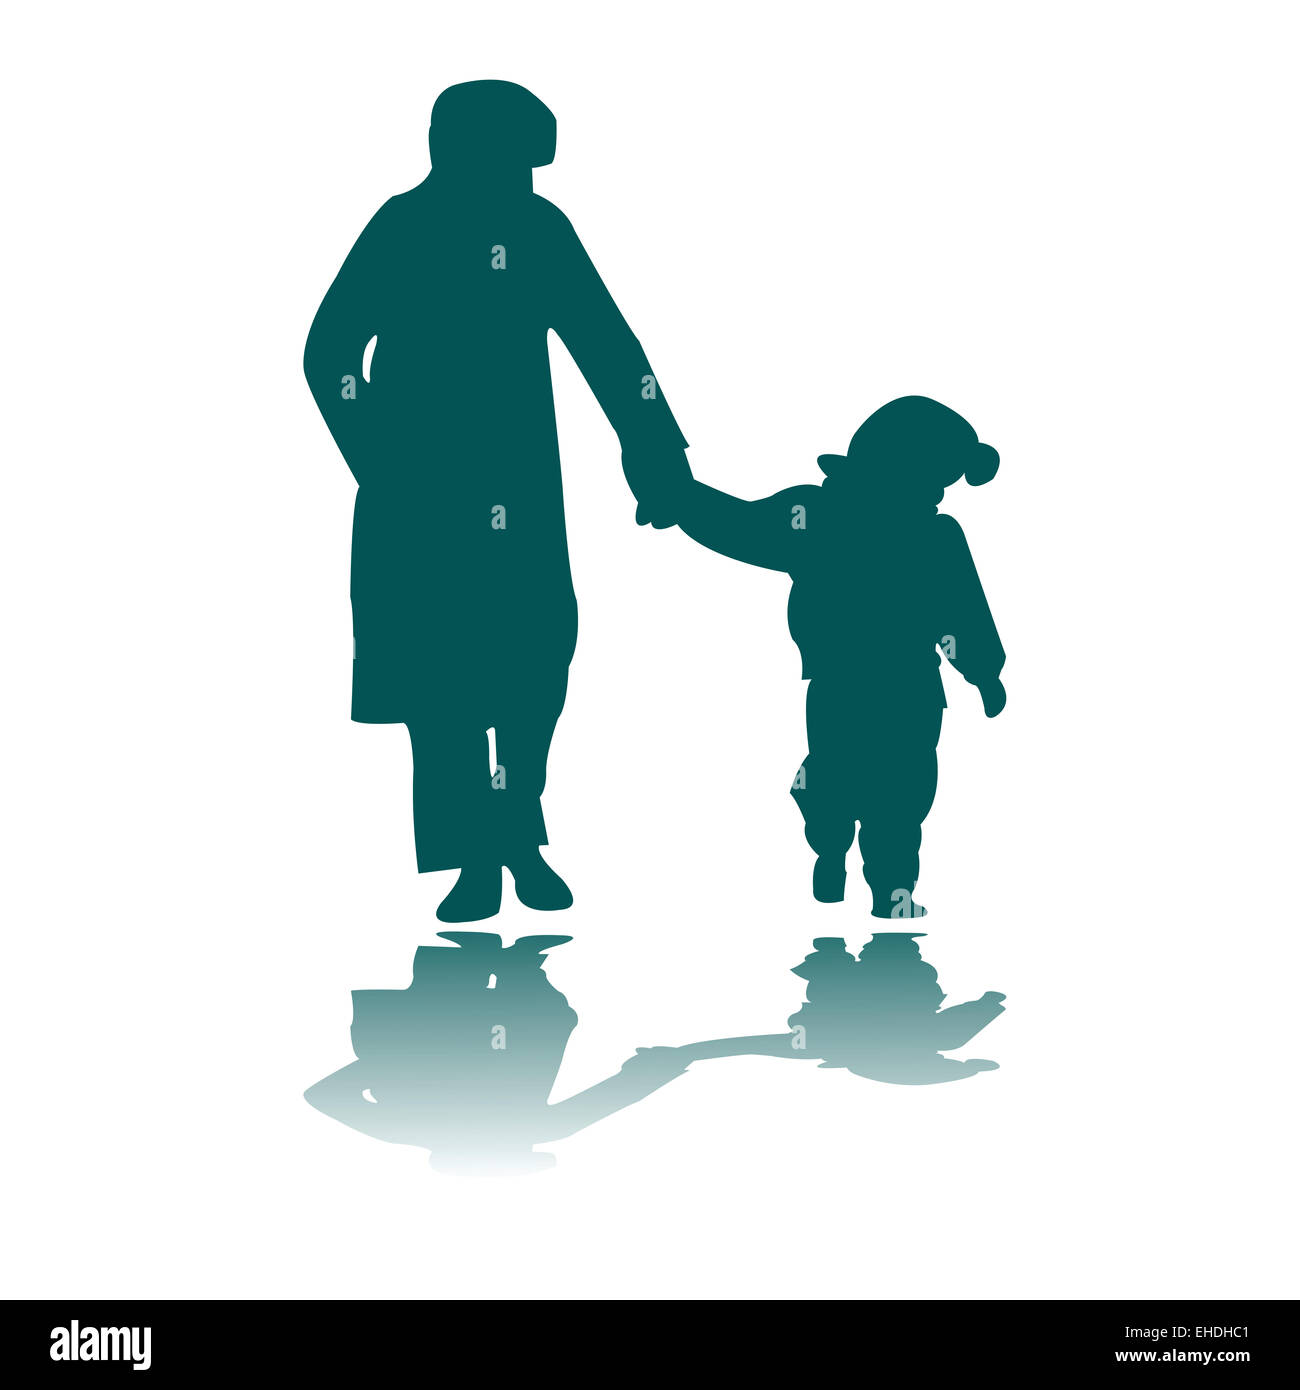 woman and child silhouettes Stock Photo